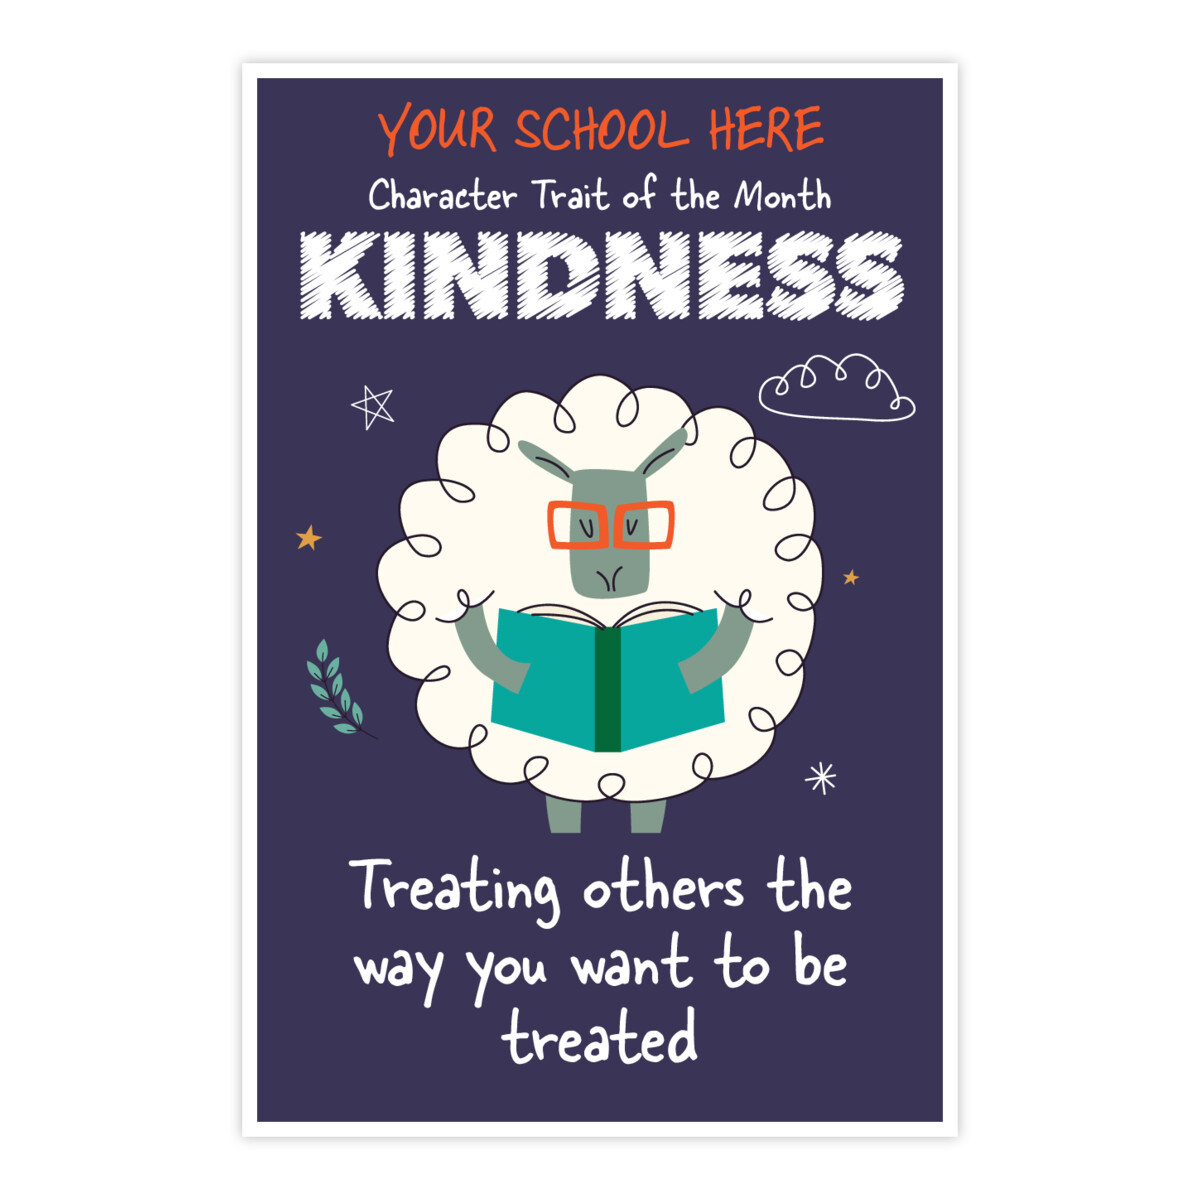 Character Trait of the Month Custom Poster - Kindness (Sheep)